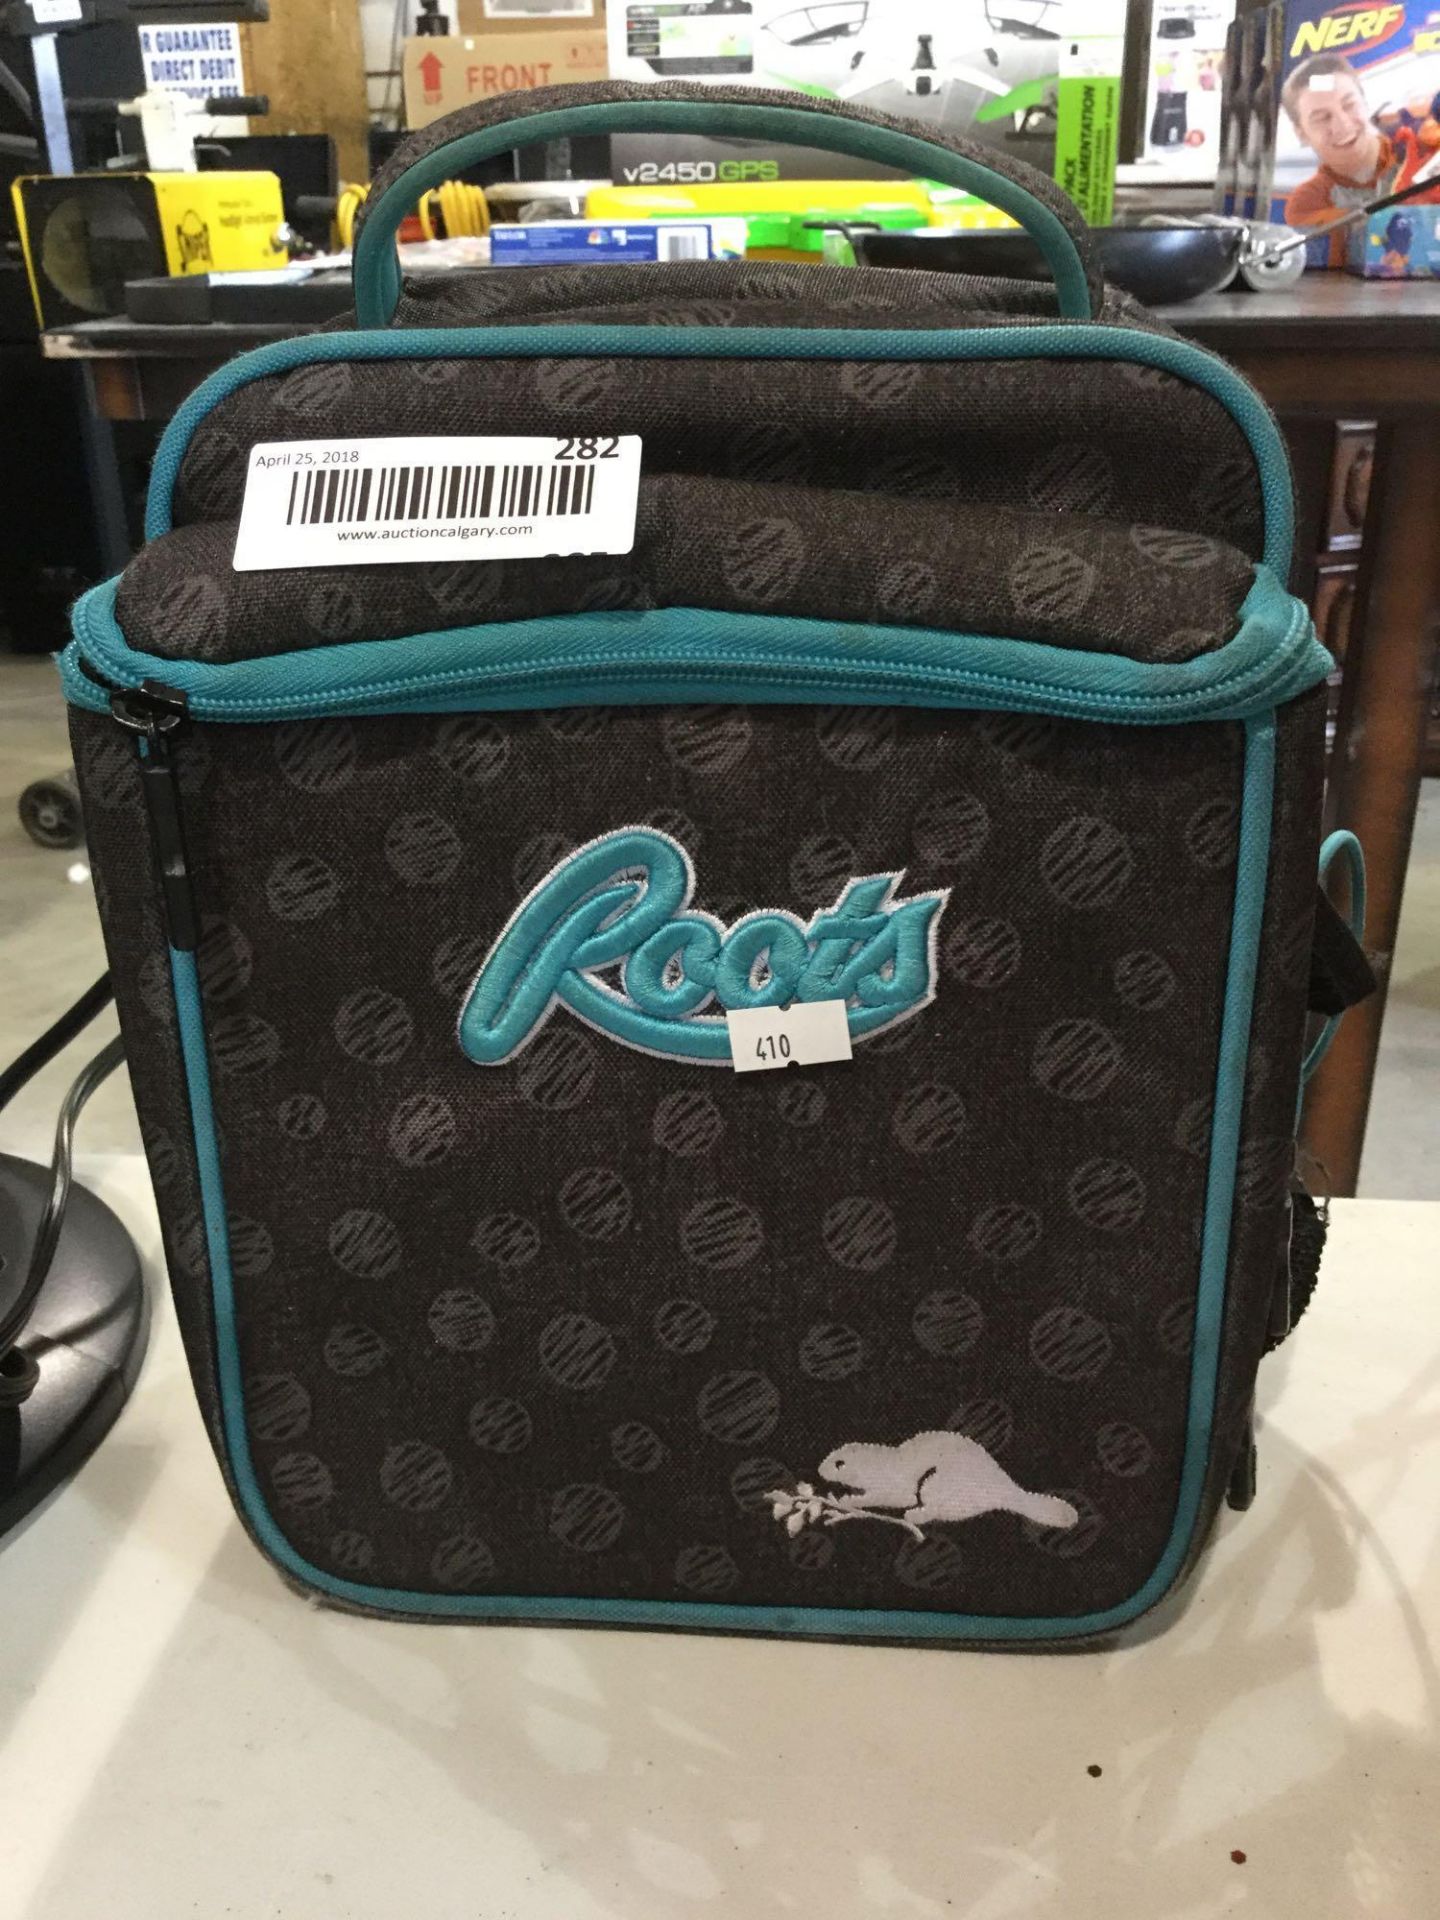 roots kids back pack grey and teal in colour